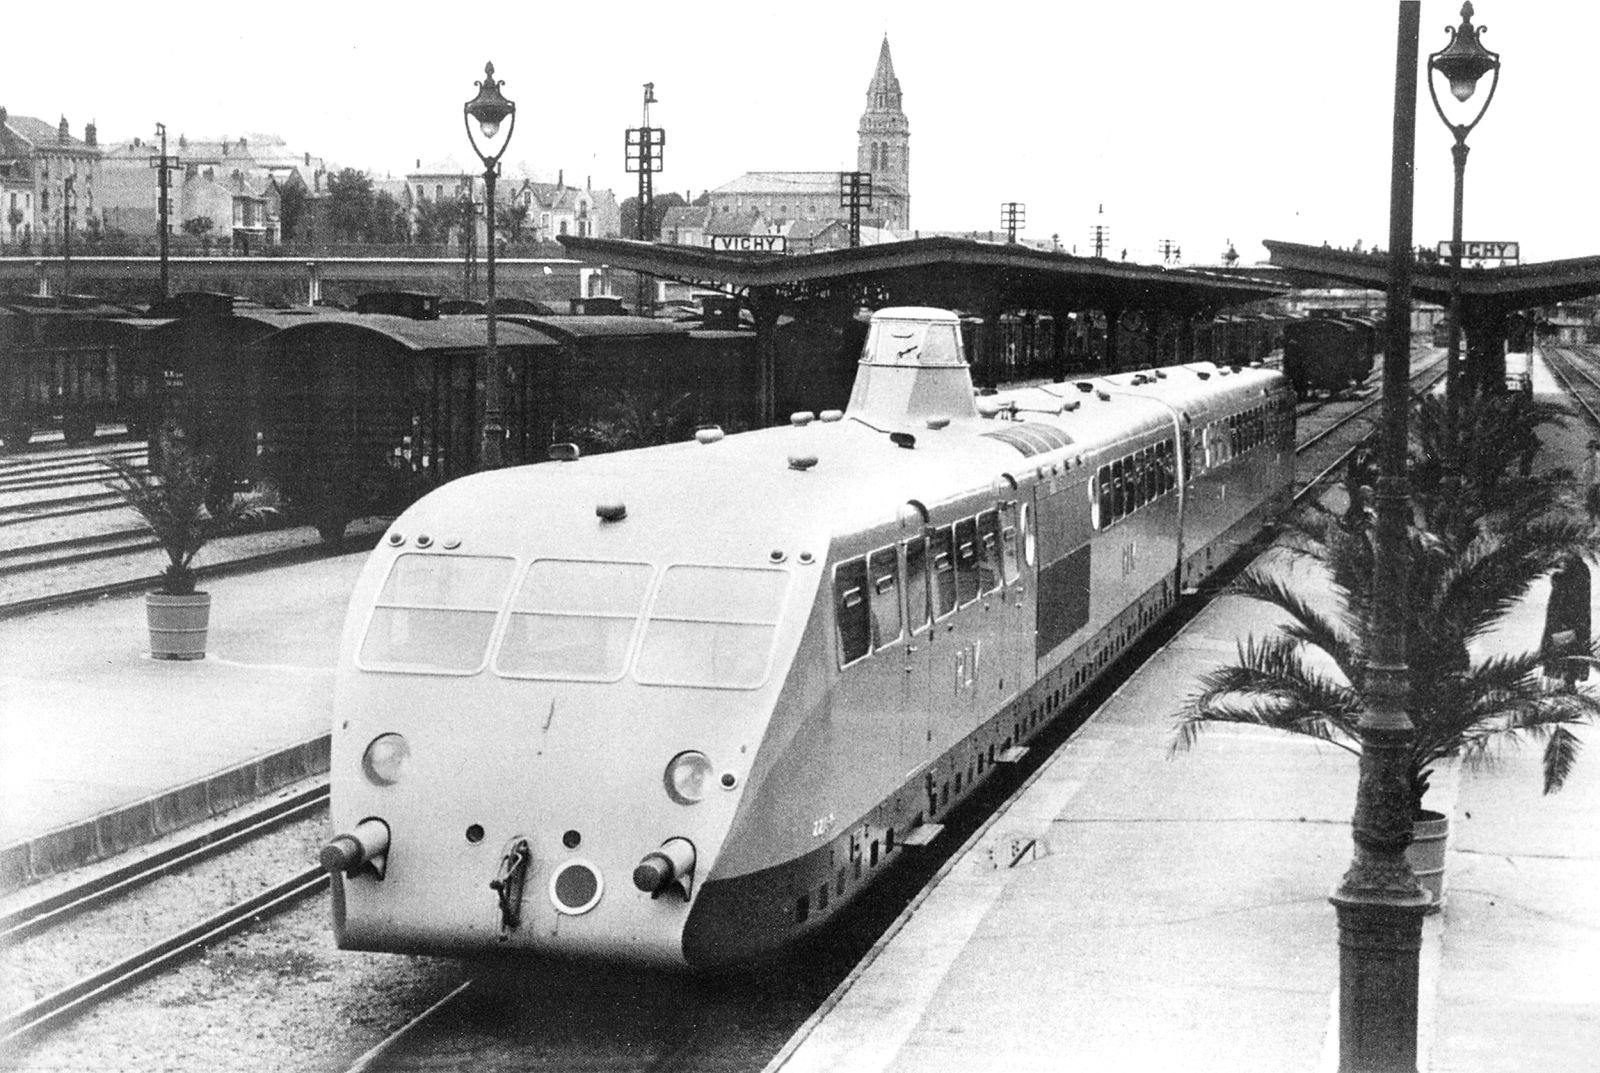 The Bugatti railcar was truly revolutionary, paving the way for a new generation of high-speed luxury train travel.
